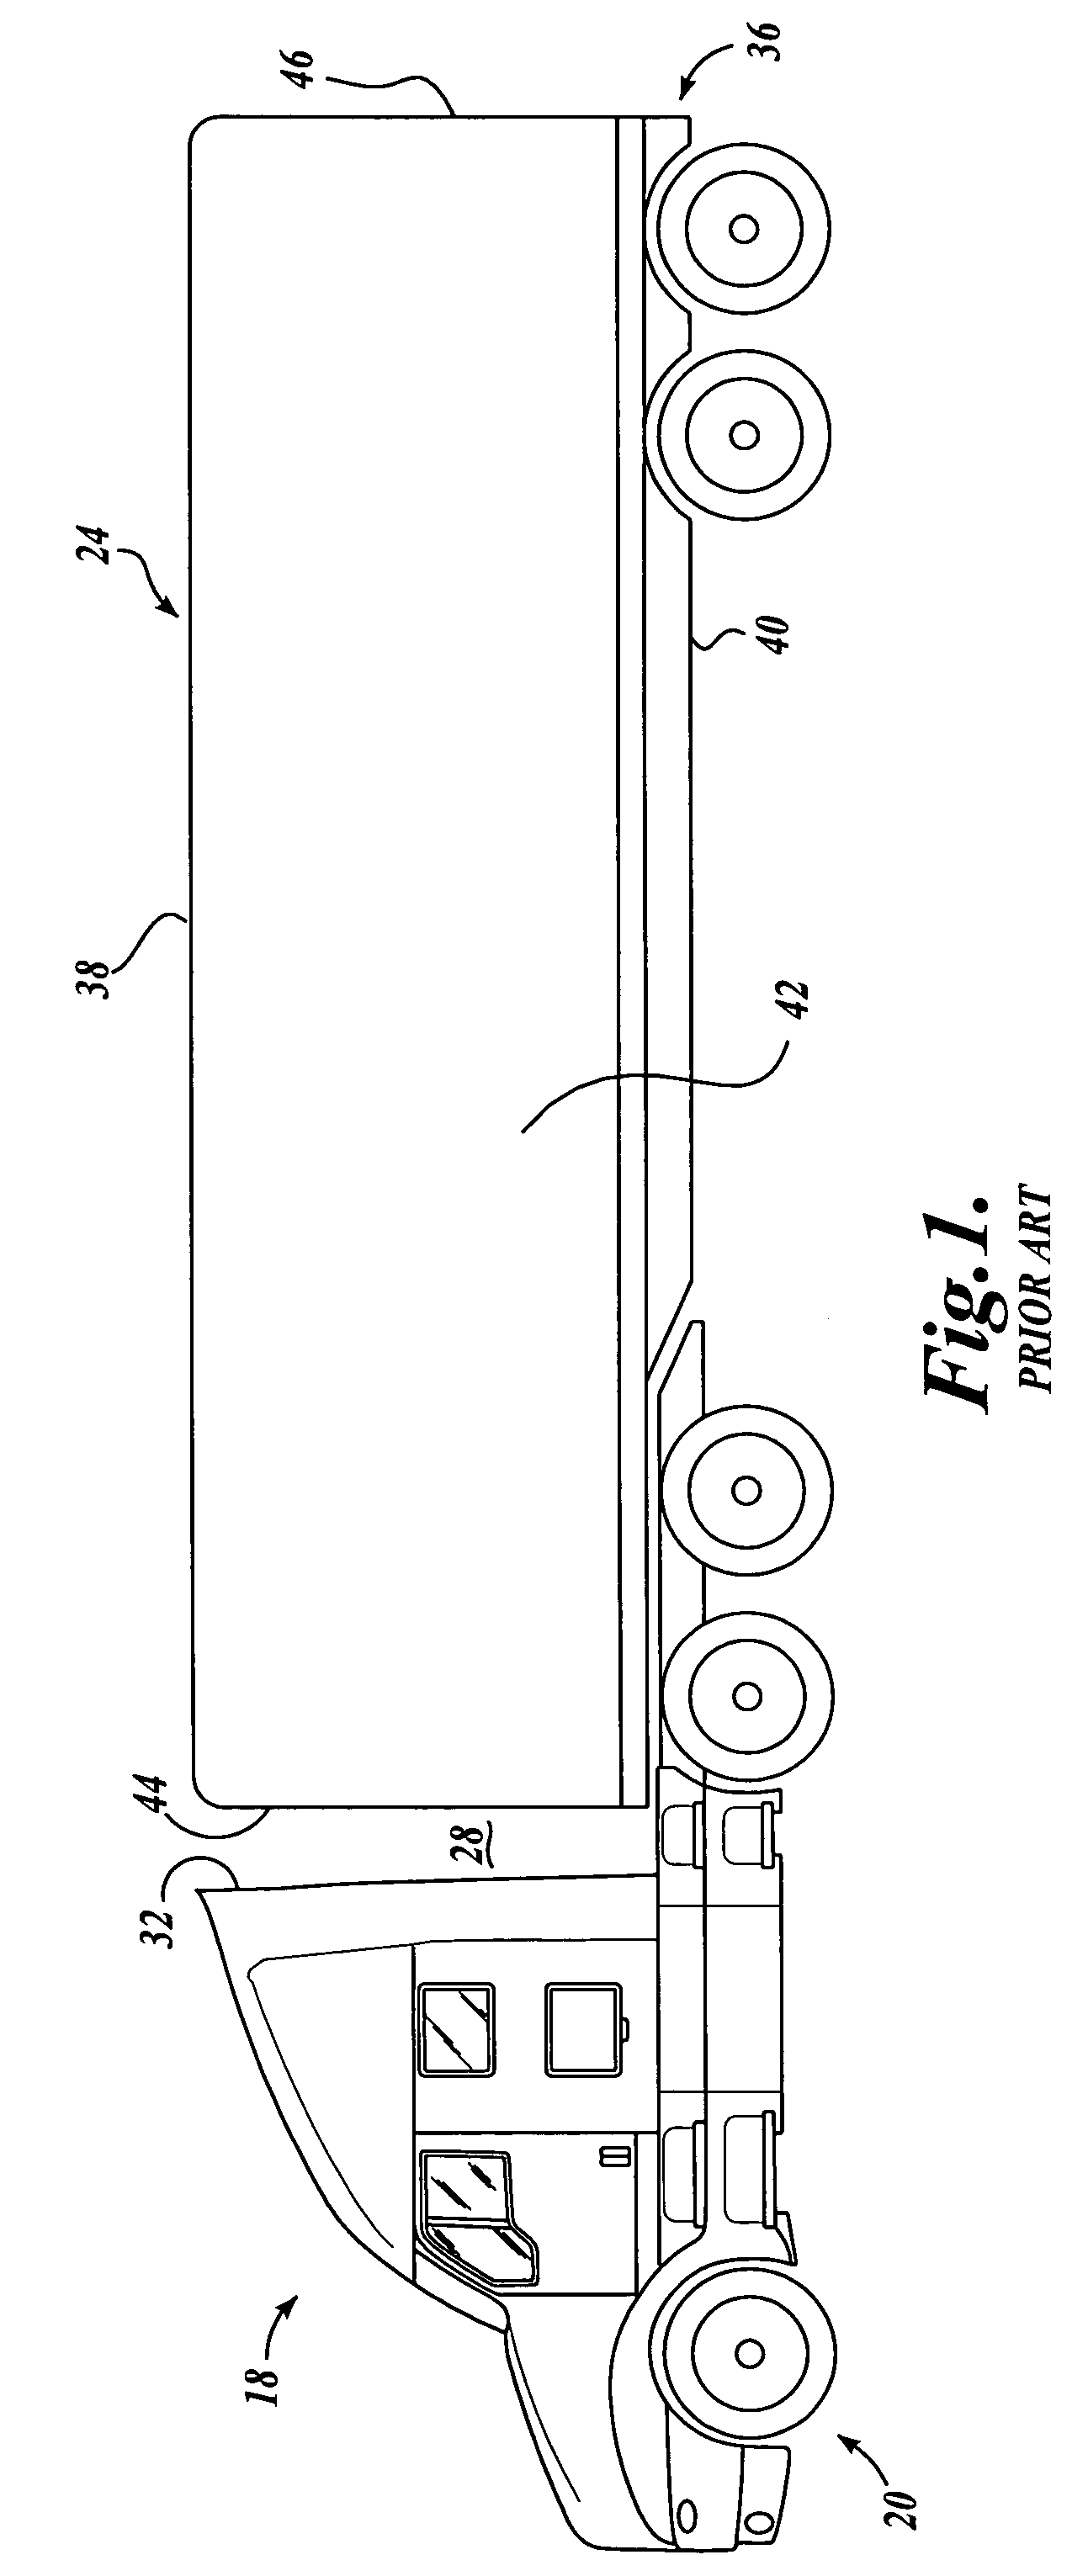 Systems and methods for reducing the aerodynamic drag on vehicles